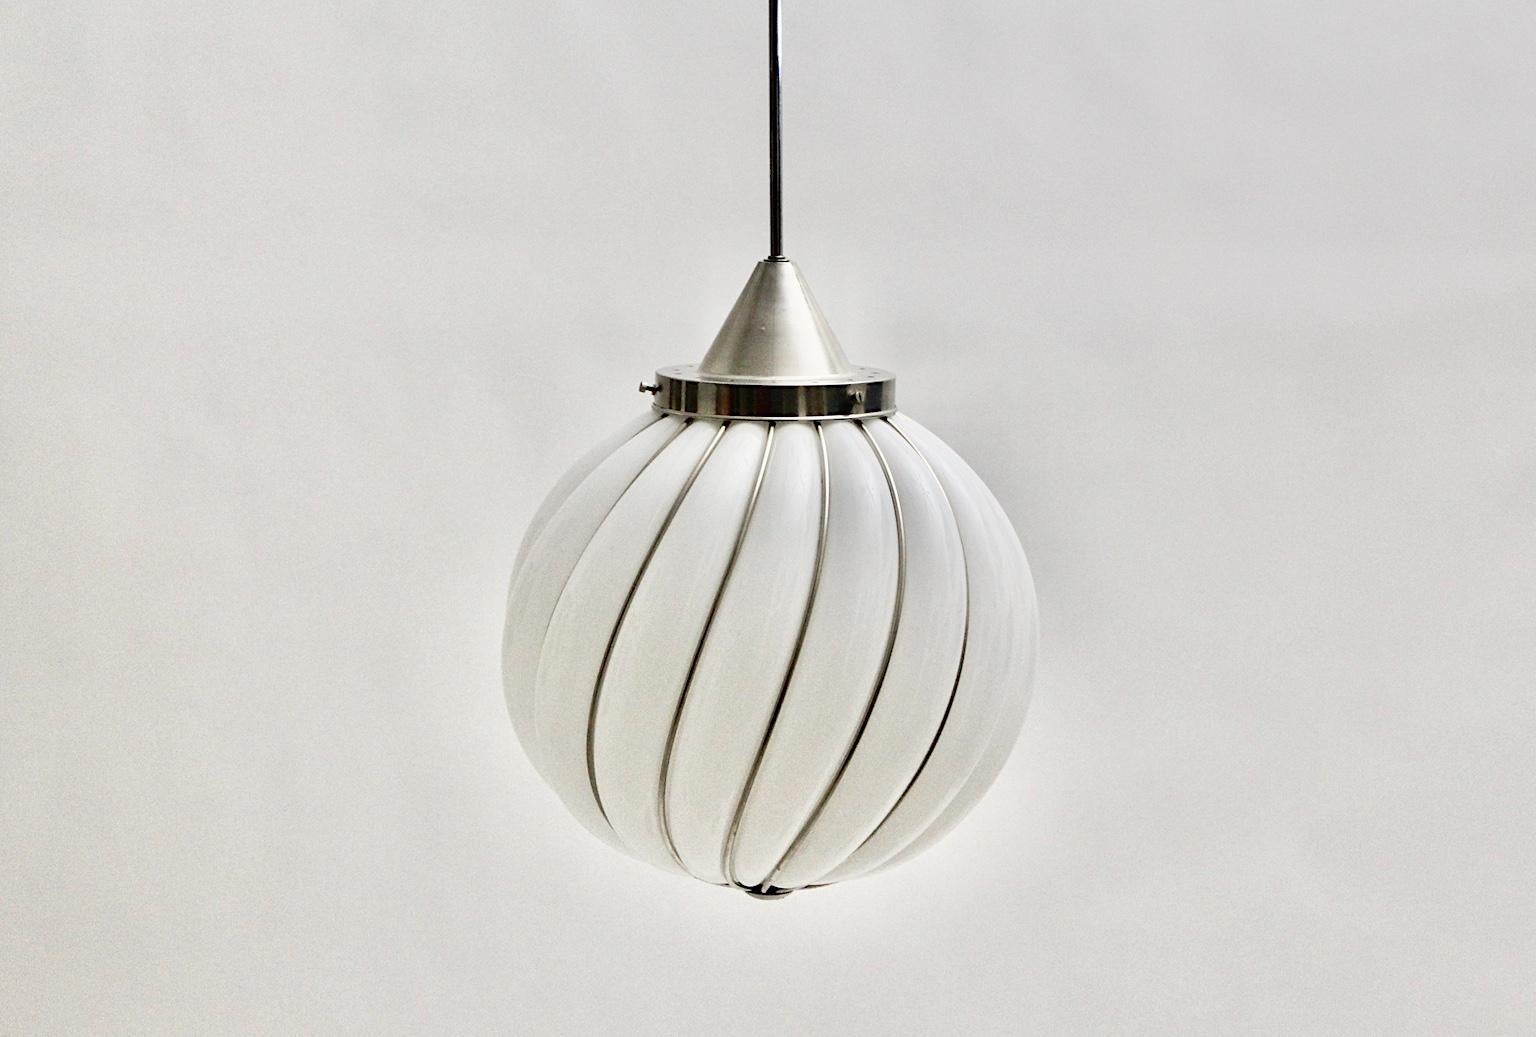 Mid-Century Modern Vintage white glass nickel pendant or hanging lamp by Adolf Loos for Veart Murano, Italy 1960s.
The handmade and high-quality craftsmanship pendant features a white glass ball with nickel plated metal lines.
The slightly curved